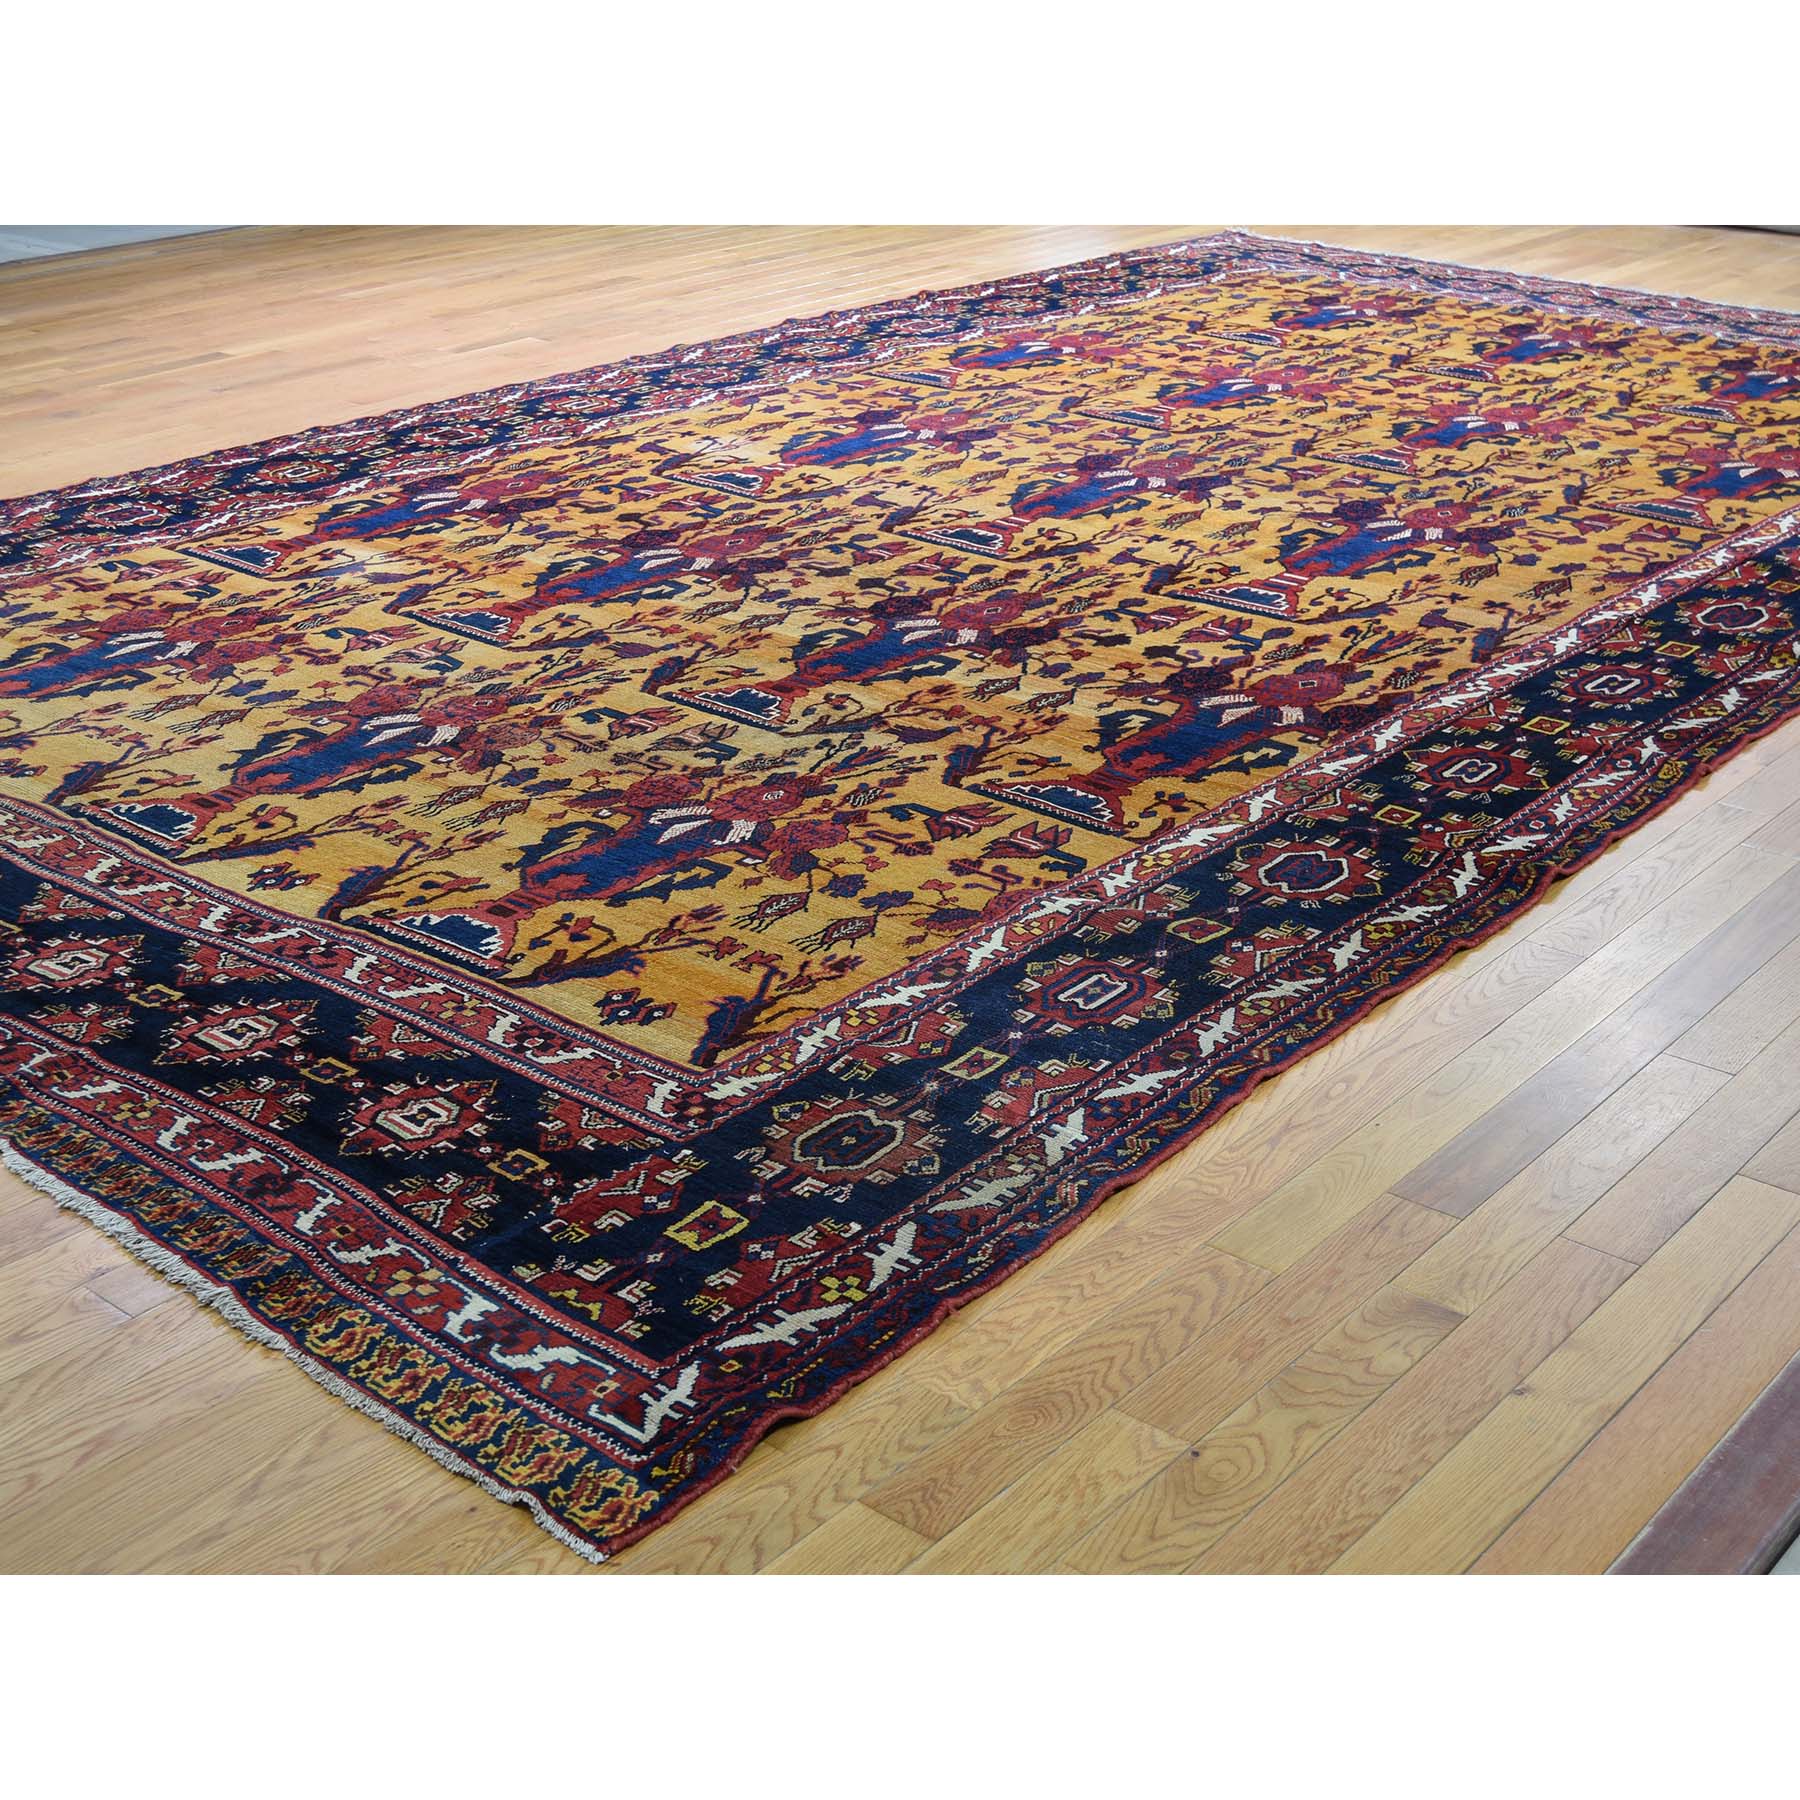 10'4"x17'7" Antique Persian Gallery Size Bakhtiari Pure Wool Hand Woven Oriental Rug 